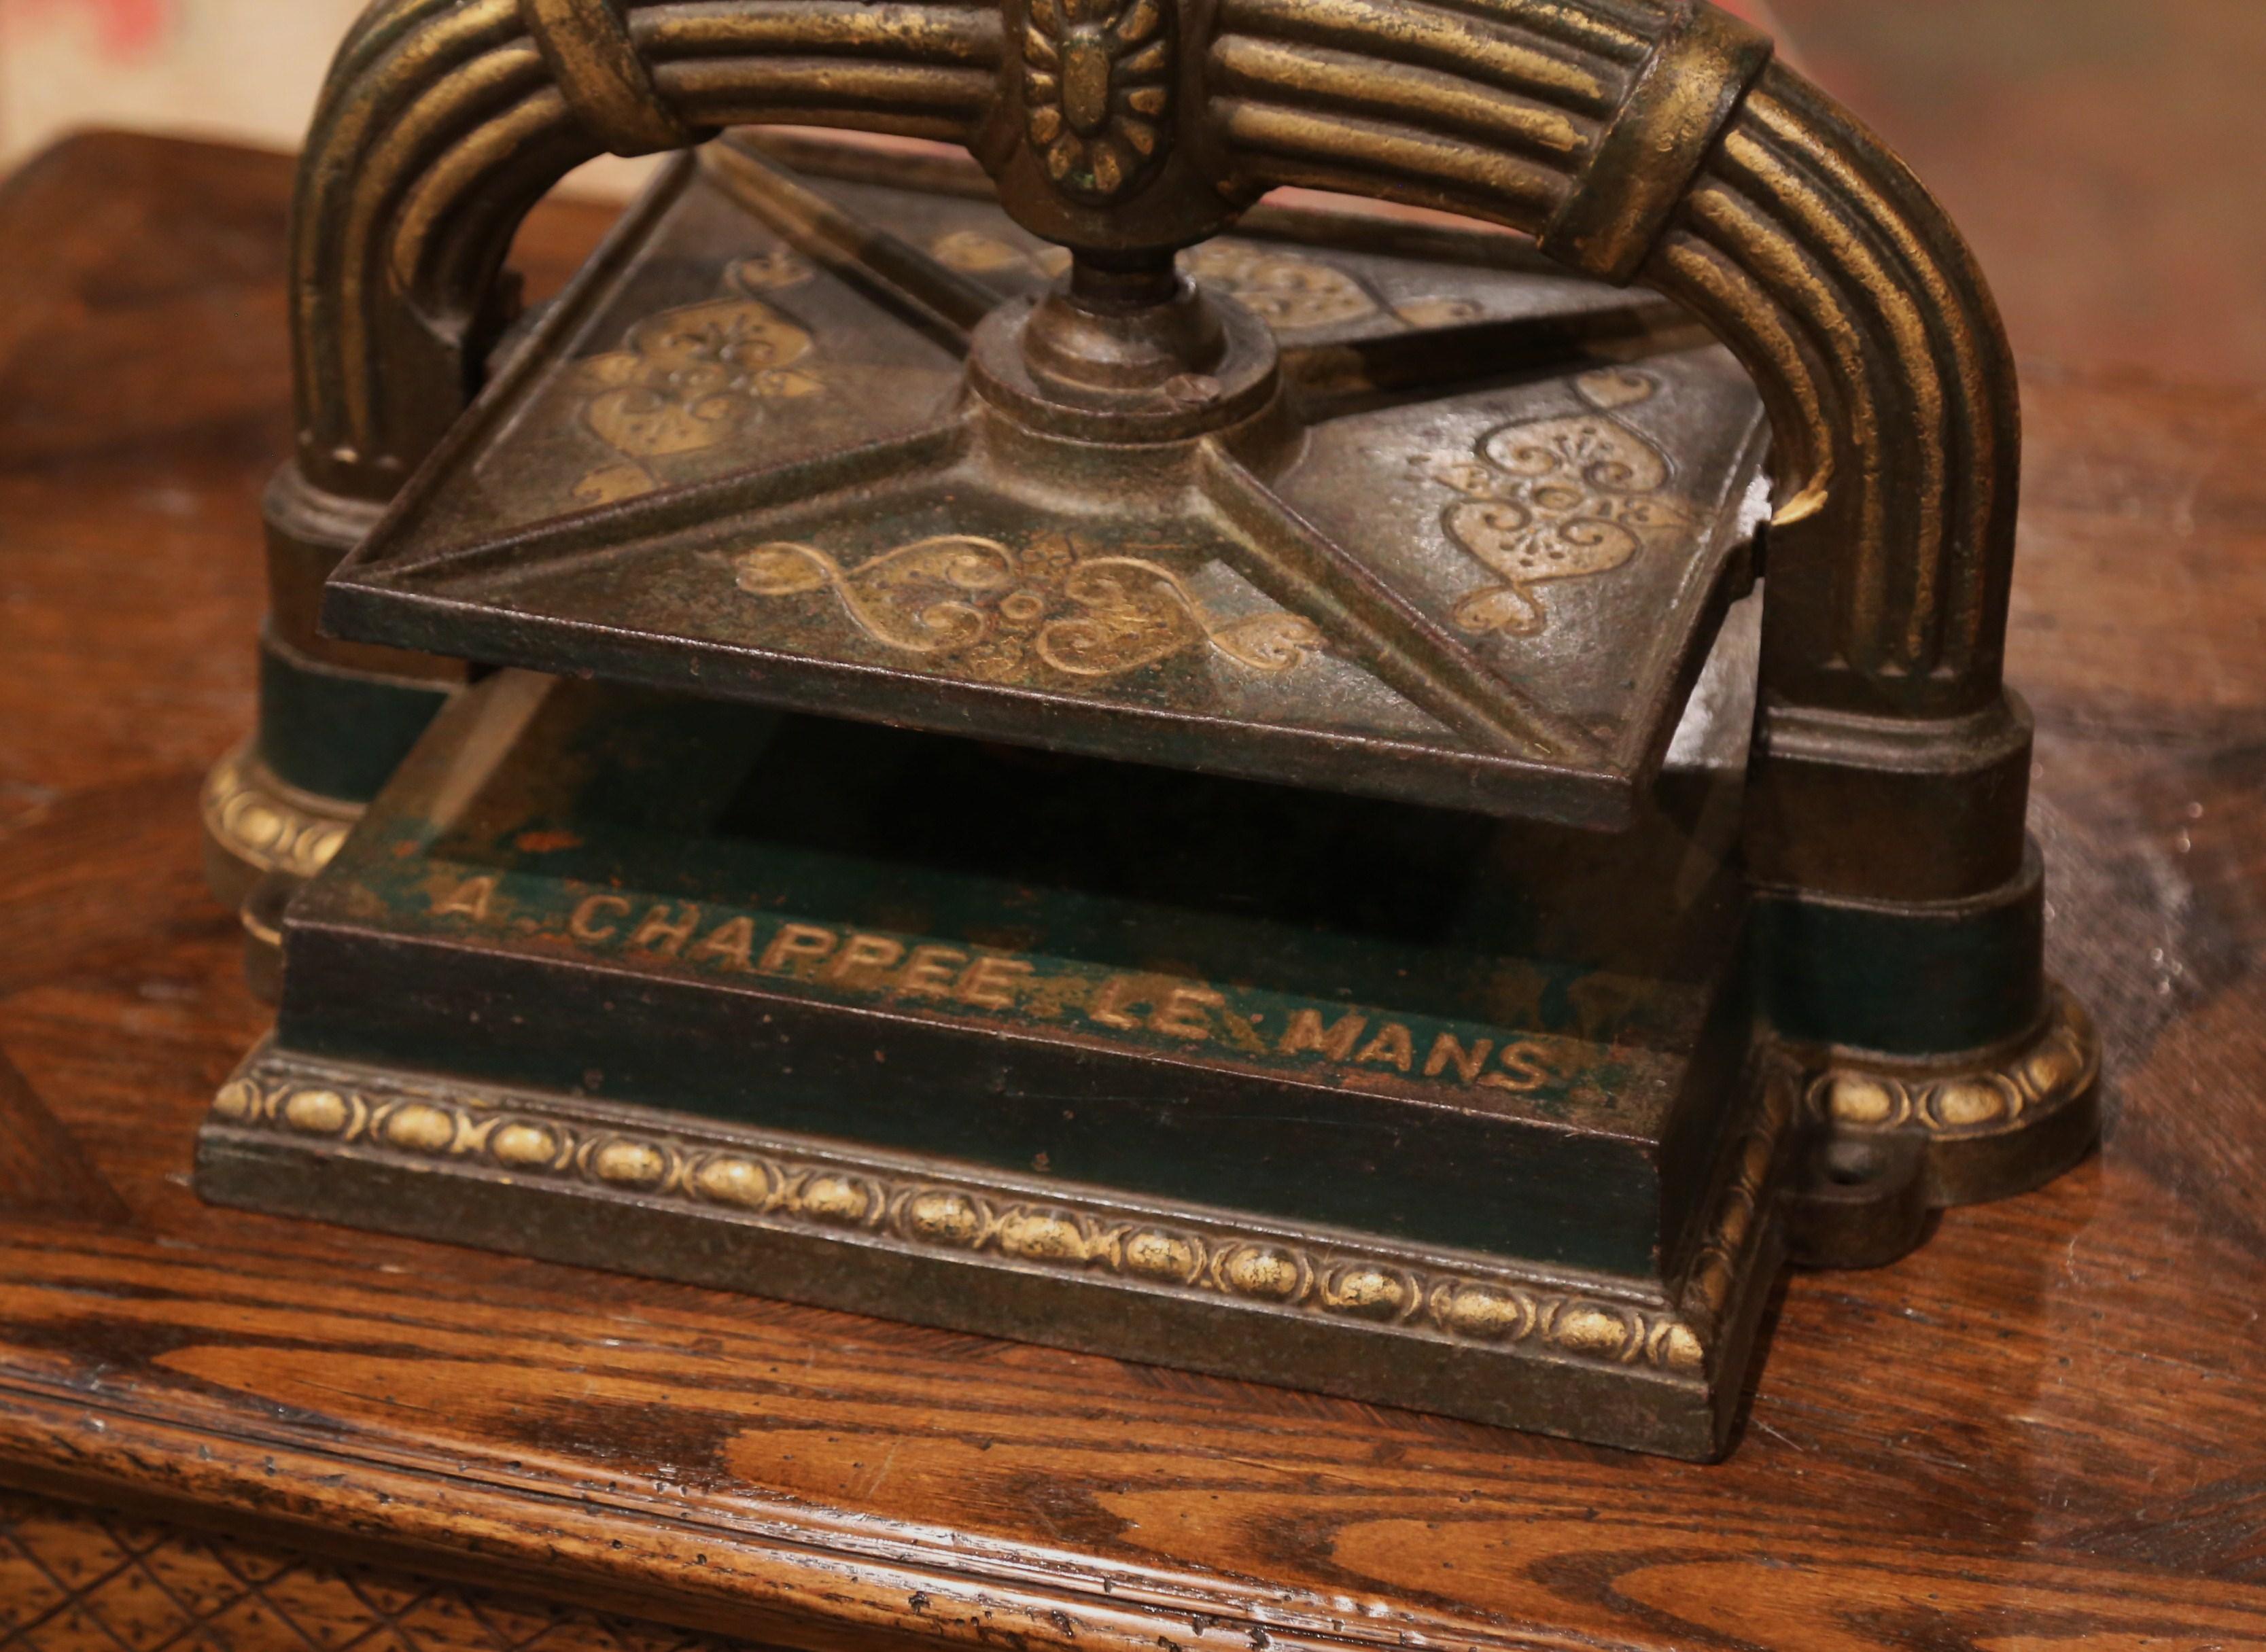 This beautiful paper binding press was forged in France, circa 1860. The classic 